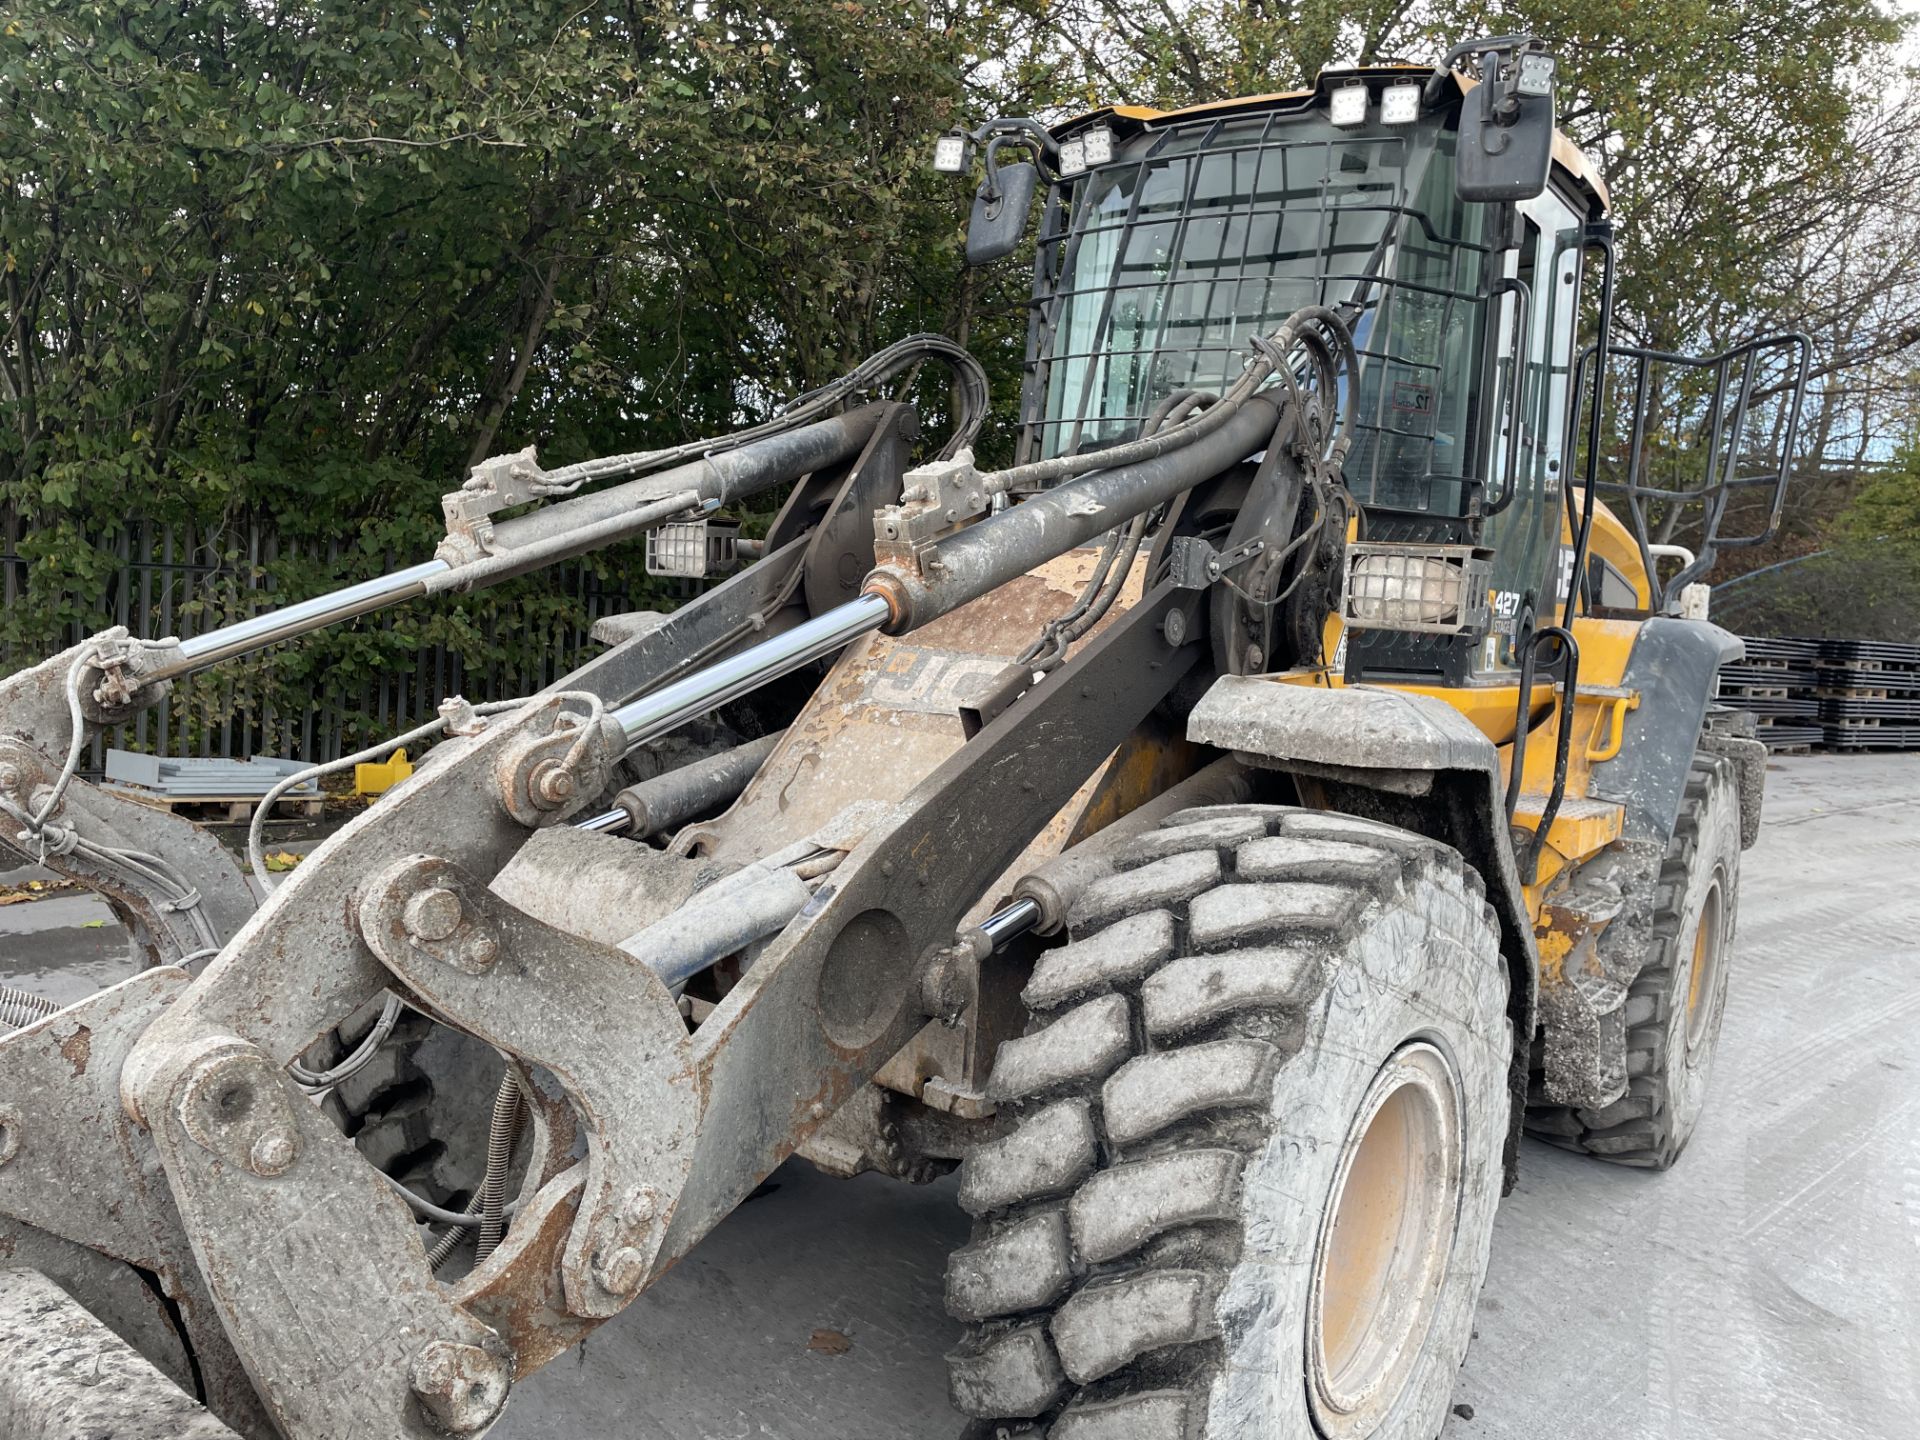 JCB, Wastemaster 427 S5, wheel loader, PIN: JCB4A5A9VK2679908 (2019), Last known Hours 3775.8, - Image 20 of 24